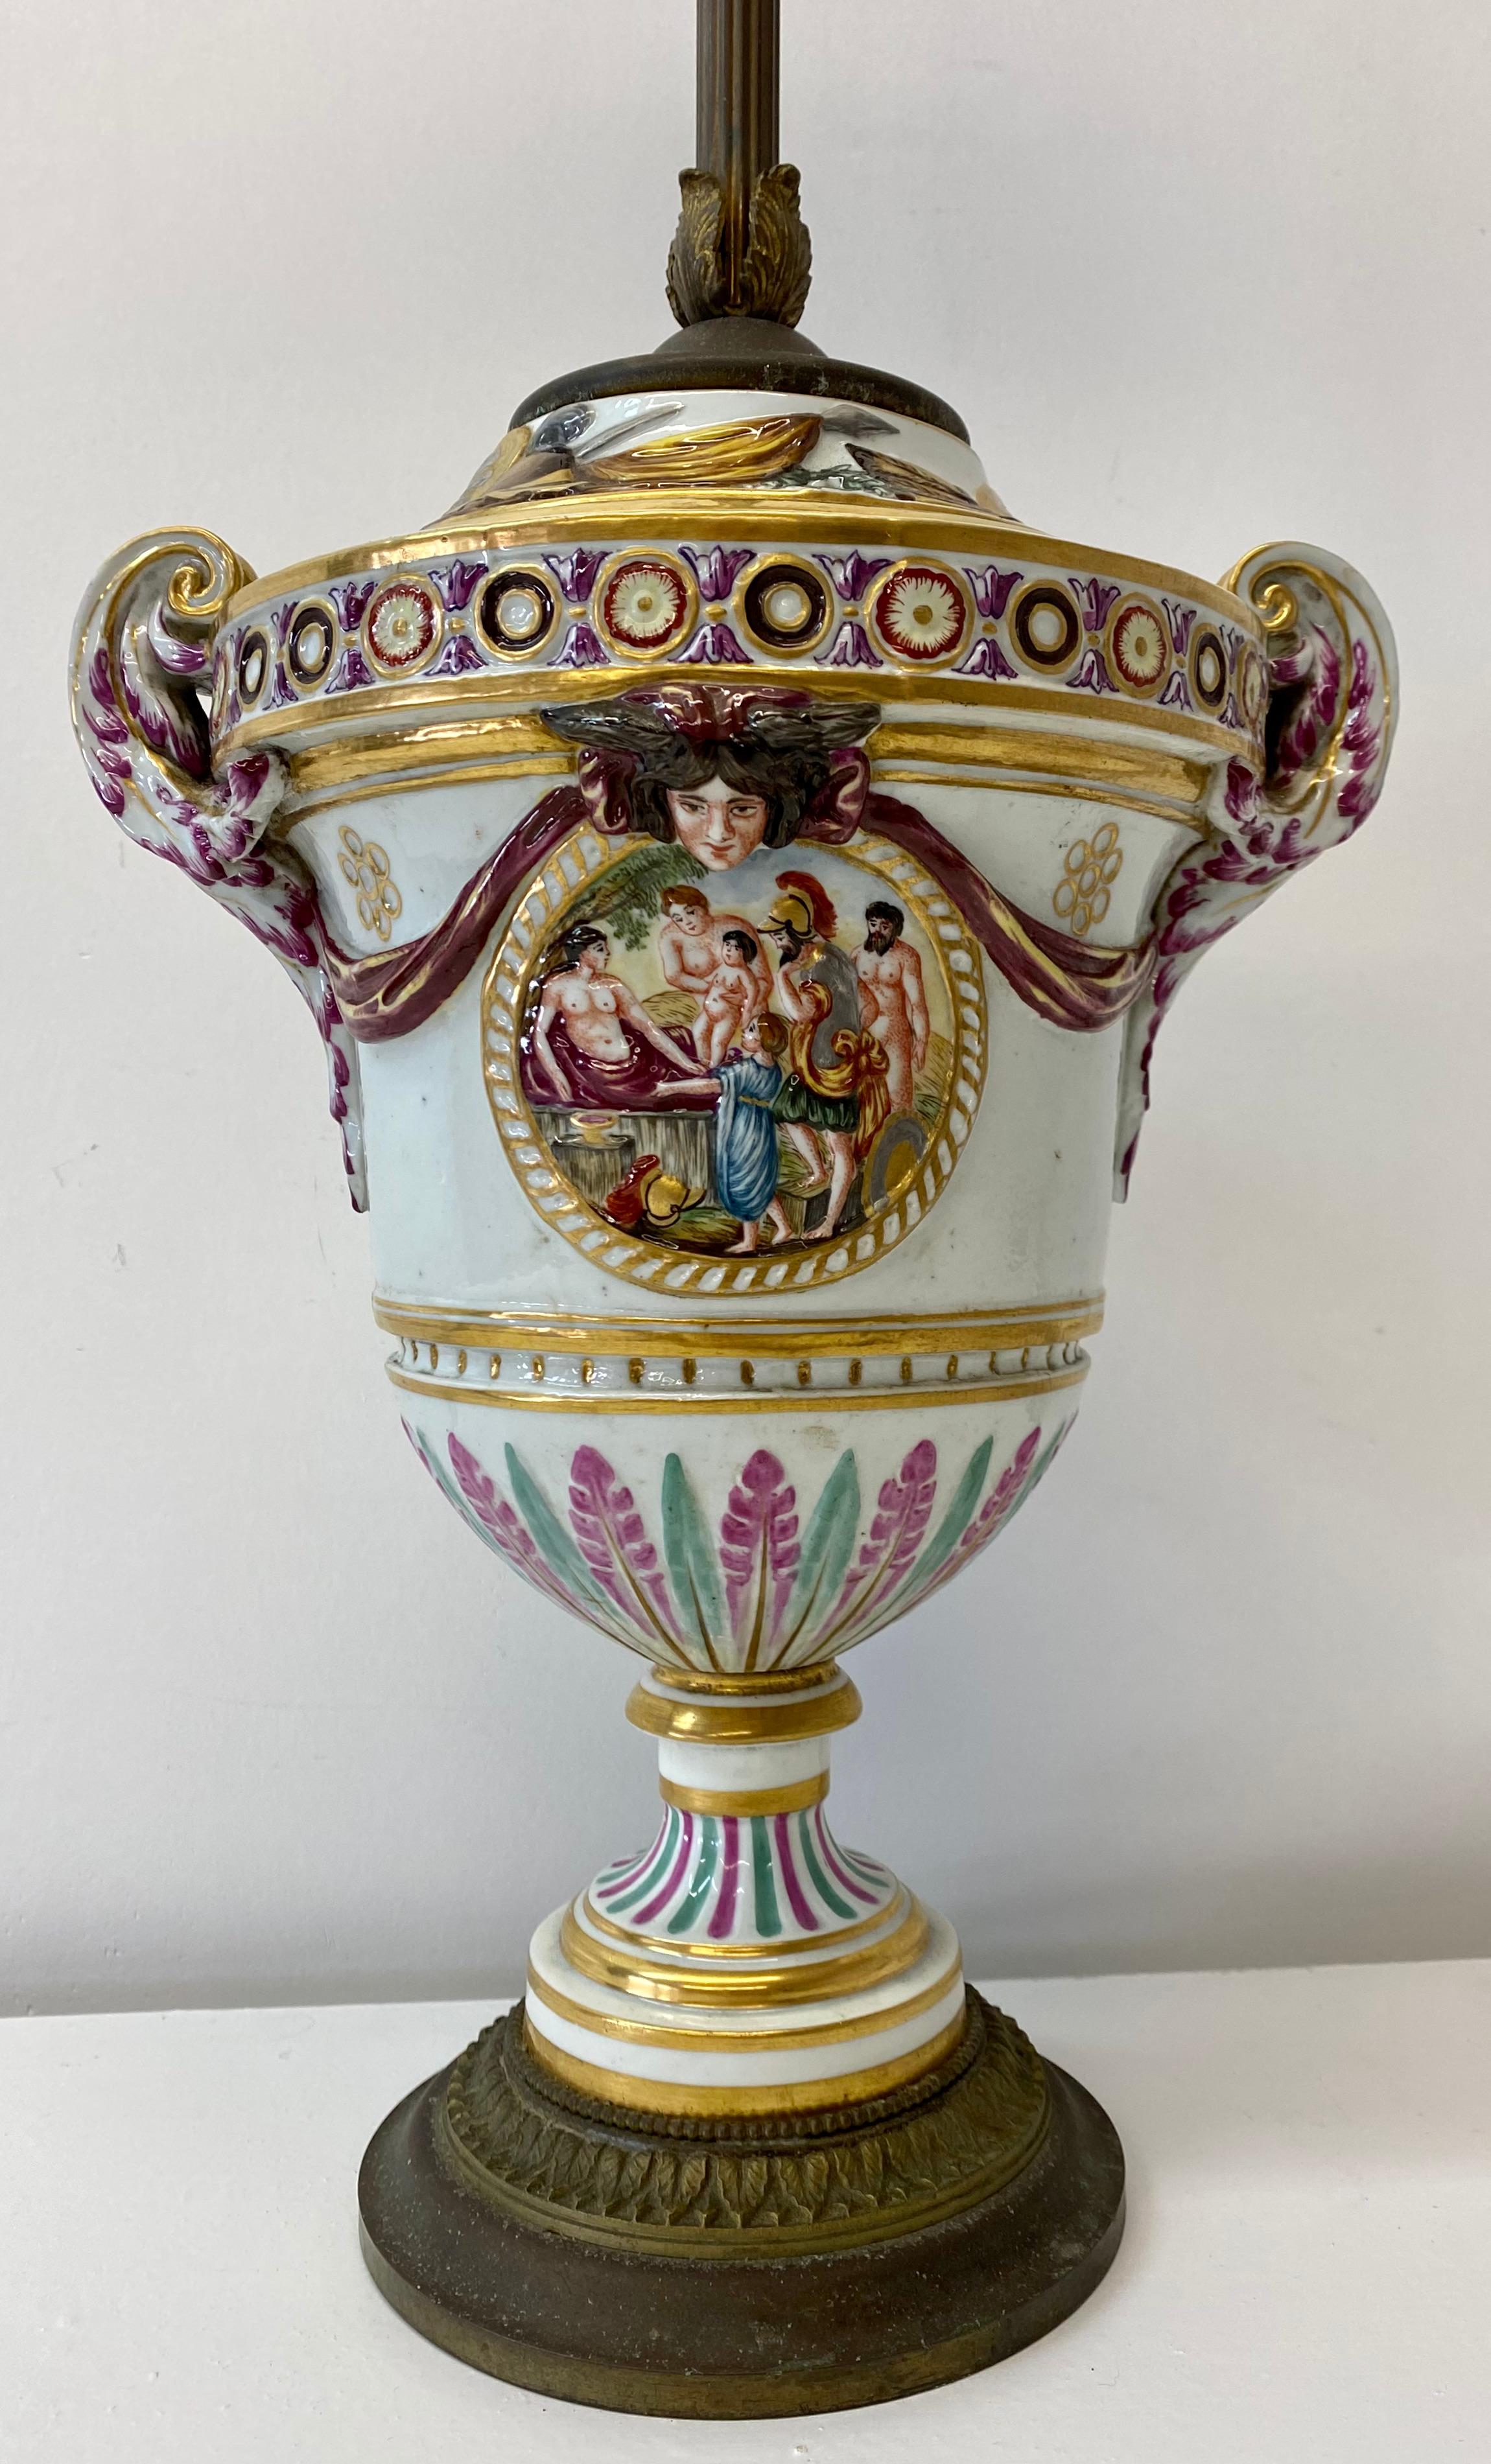 Early 20th century capodimonte porcelain double socket table lamp

Beautiful hand painted mythological Roman scenes featuring Romulus and Remus

5.75